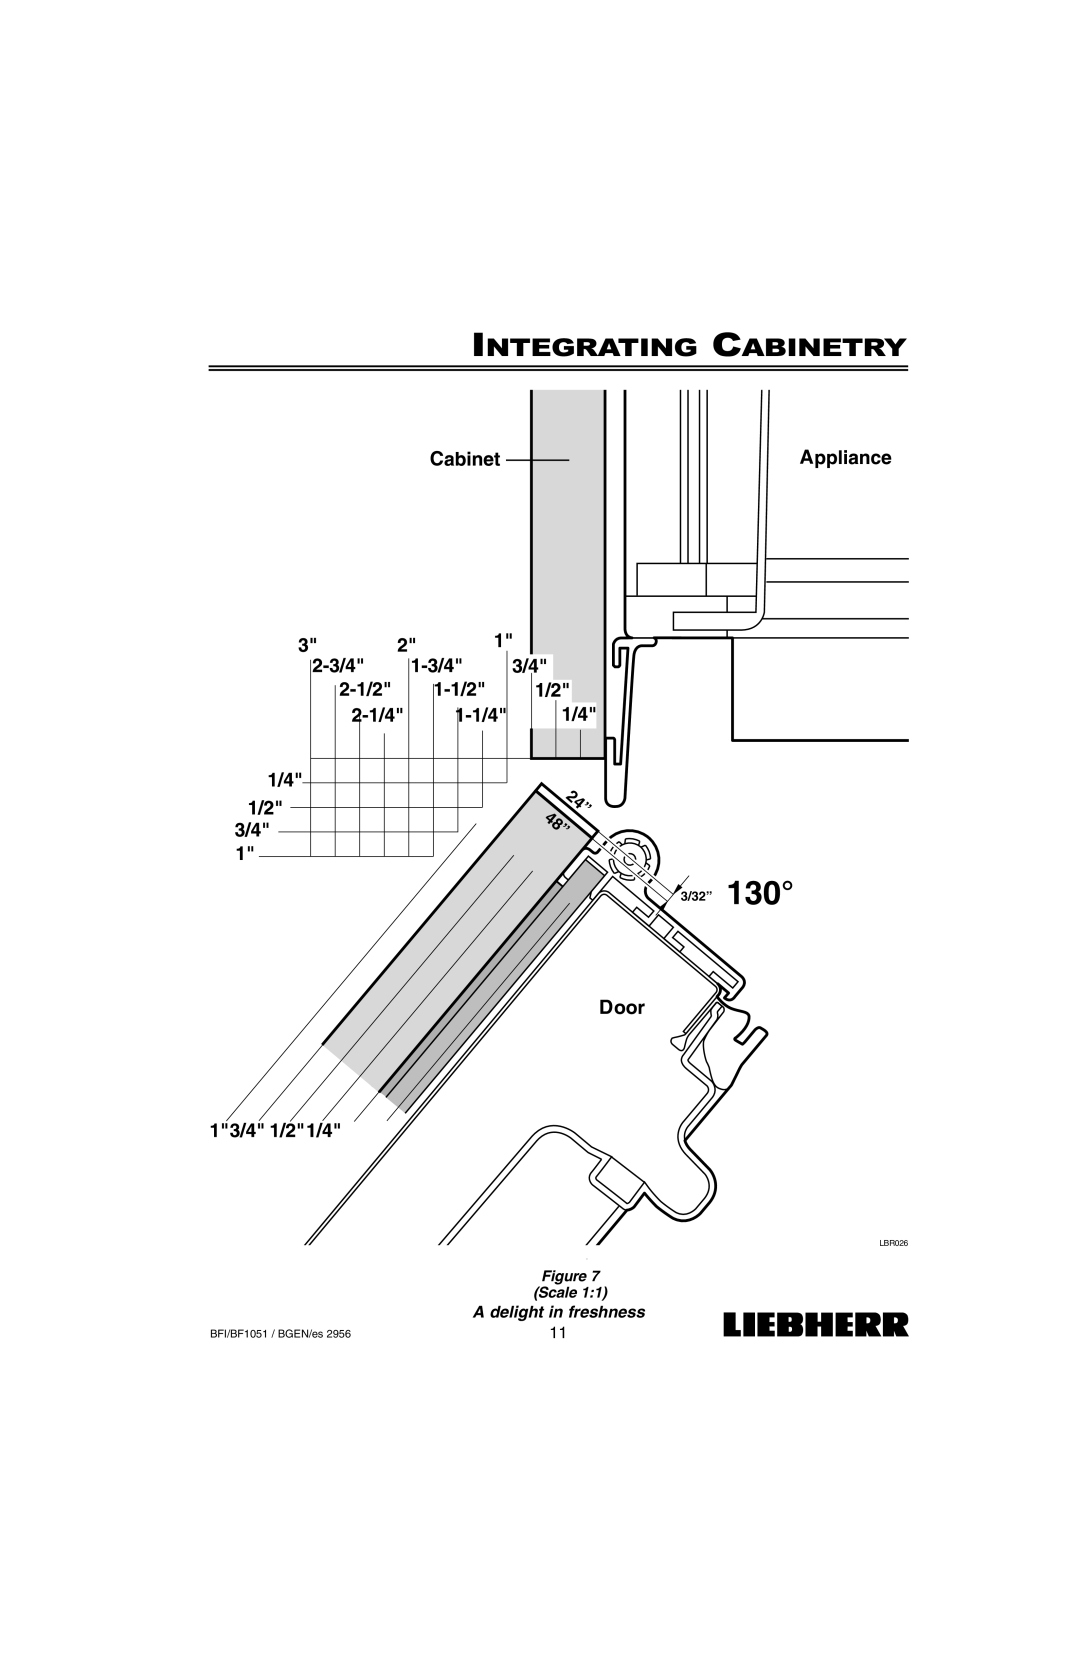 Liebherr BF1051, BFI1051 installation instructions Figure Scale 1:1, Integrating Cabinetry, A delight in freshness, LBR026 